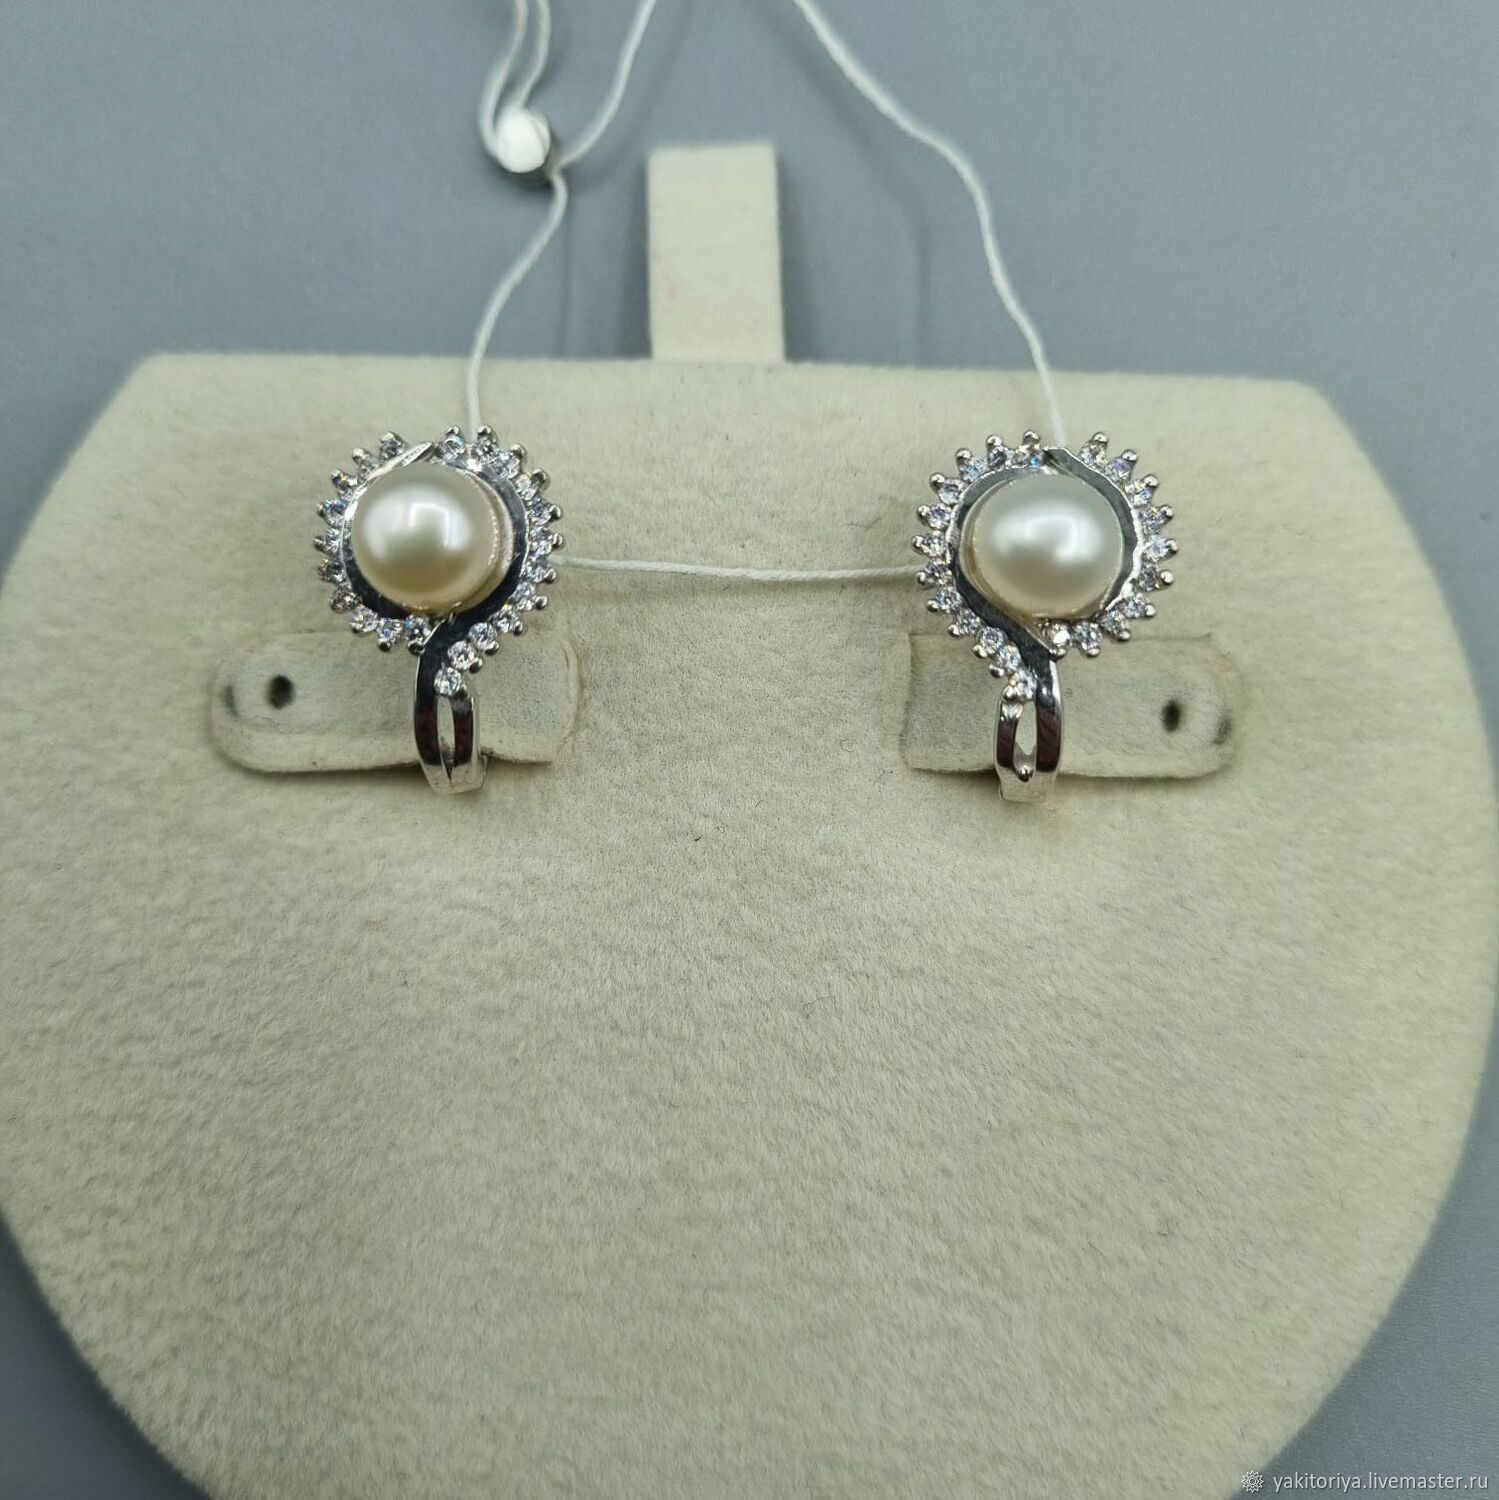 Silver earrings with white pearls 7 mm and cubic zirconia, Earrings, Moscow,  Фото №1